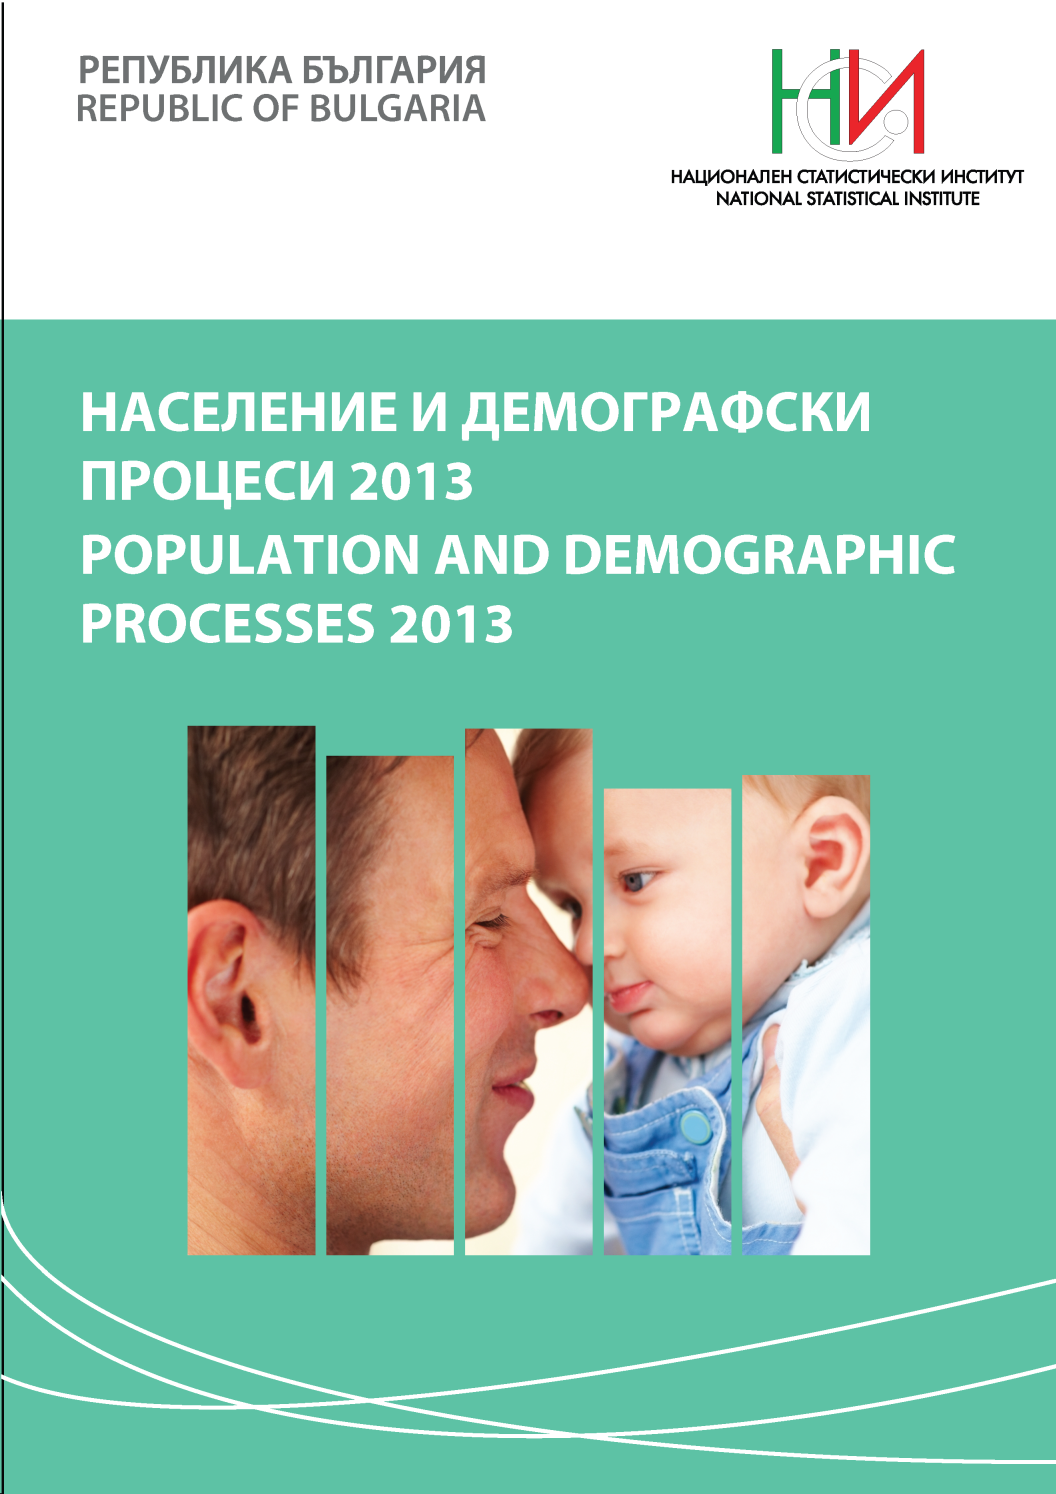 Population and Demographic Processes 2013